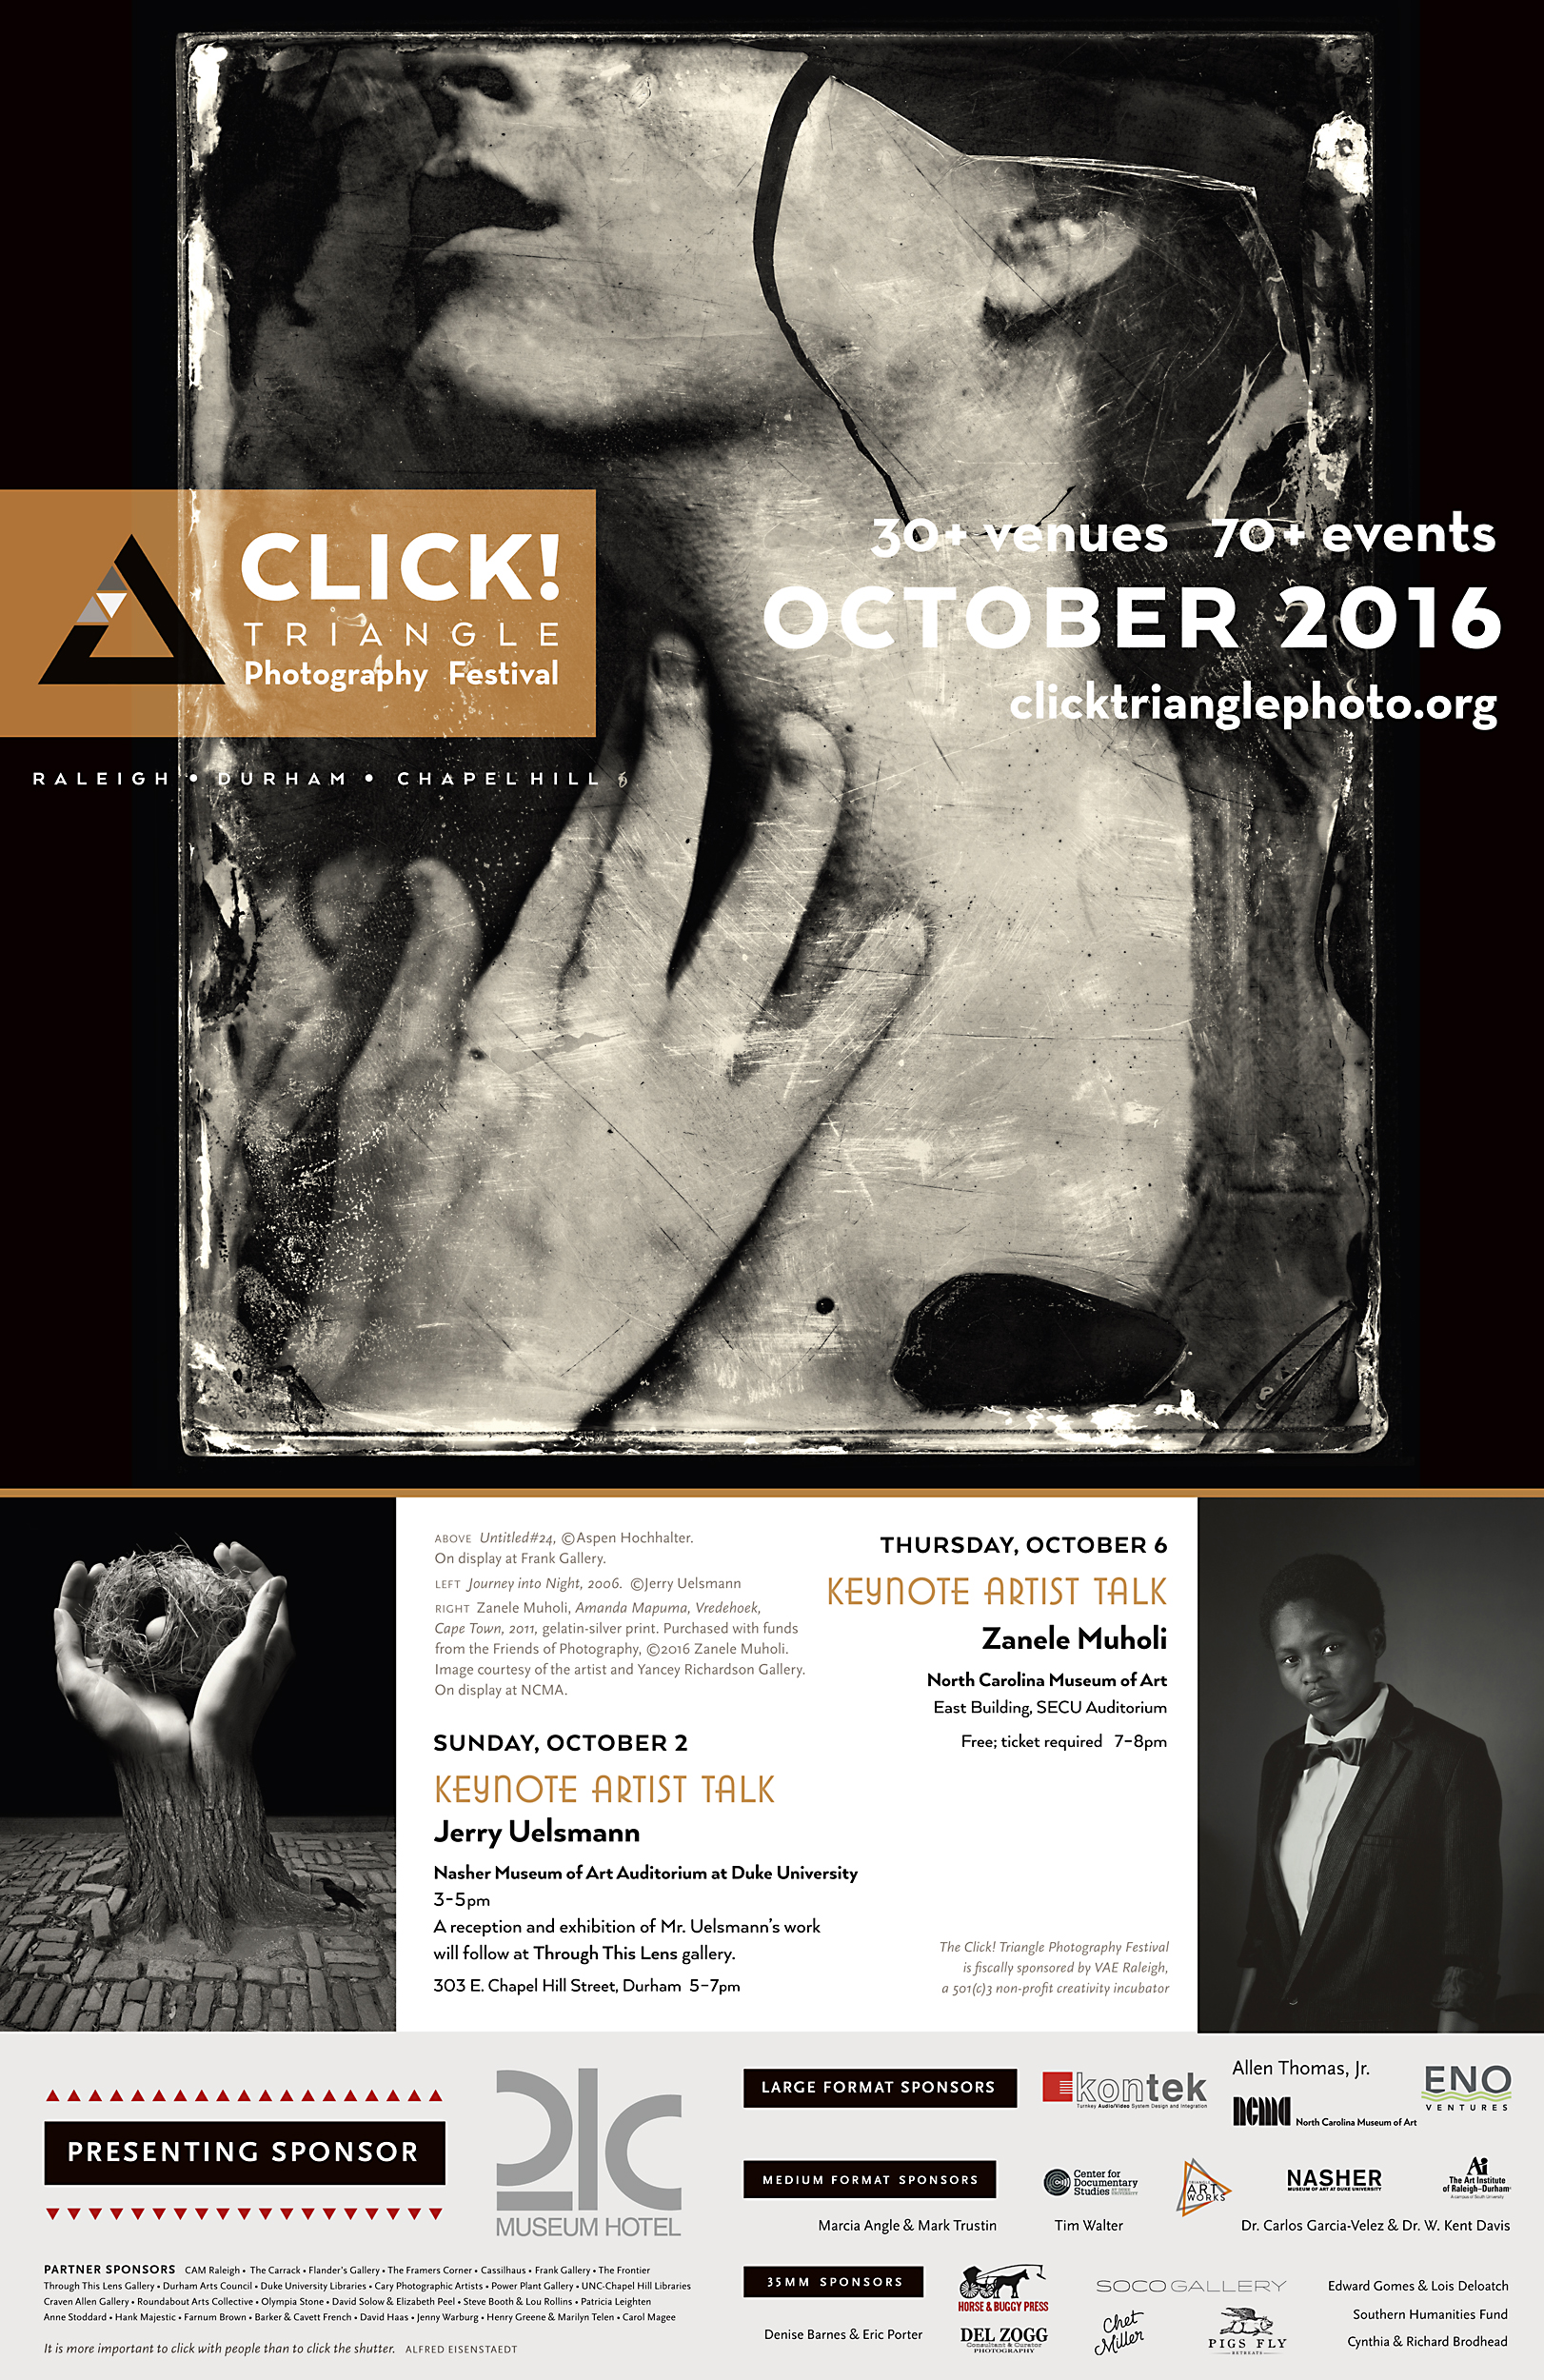  As well as being a co-sponsor of the festival, H&amp;B has designed the program guides and posters for Click! since 2015. 12 x 18 inch poster. 